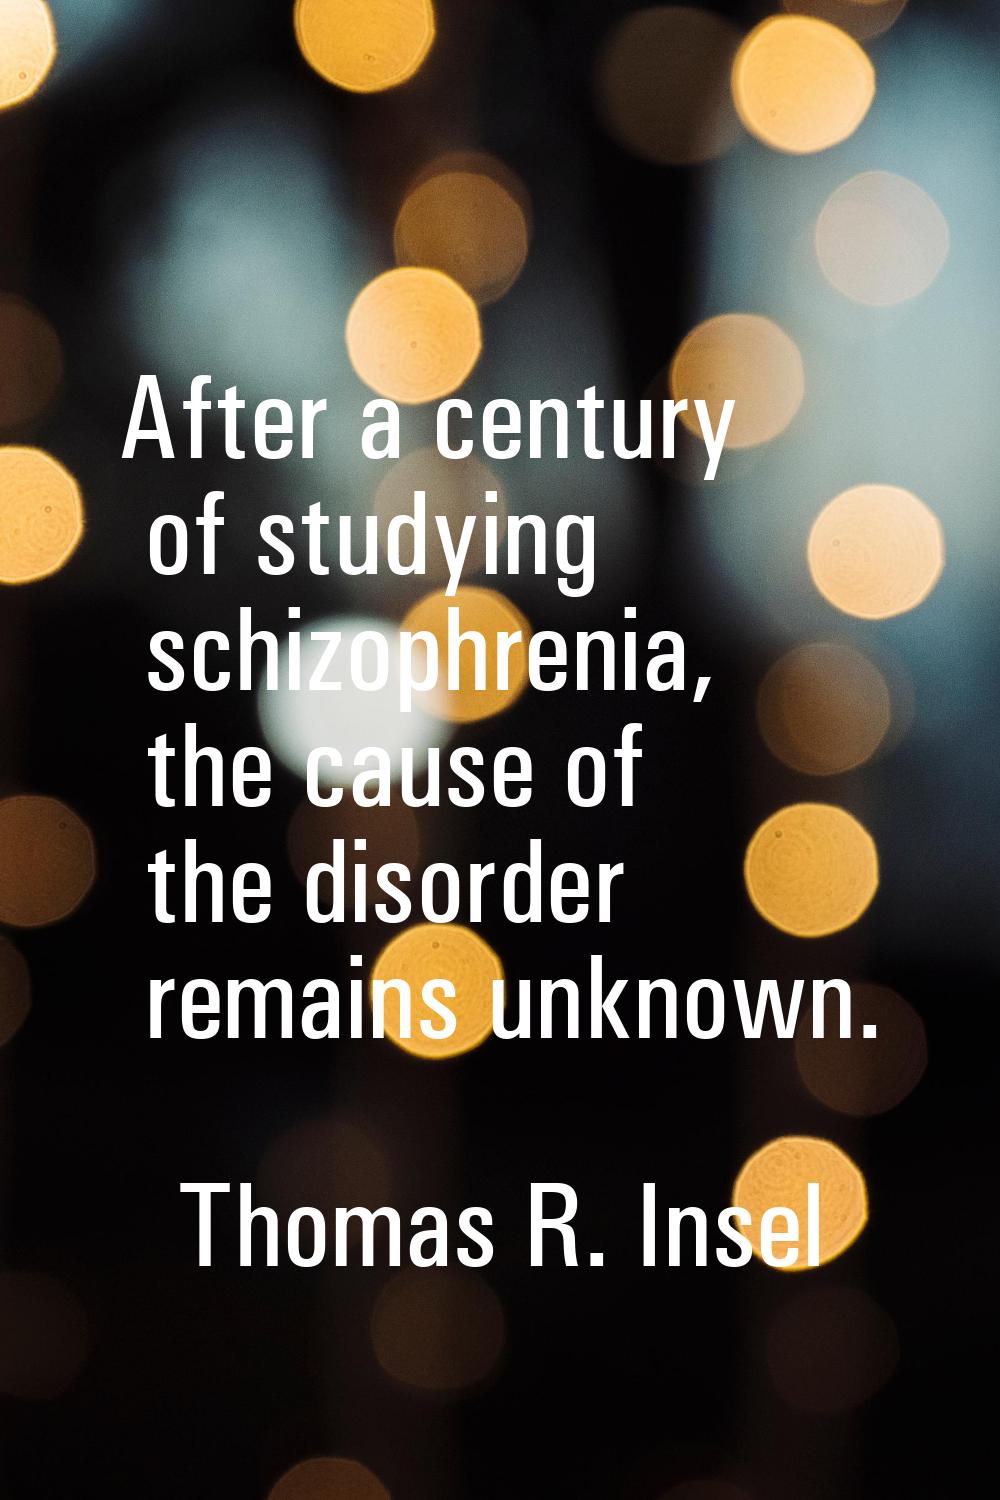 After a century of studying schizophrenia, the cause of the disorder remains unknown.